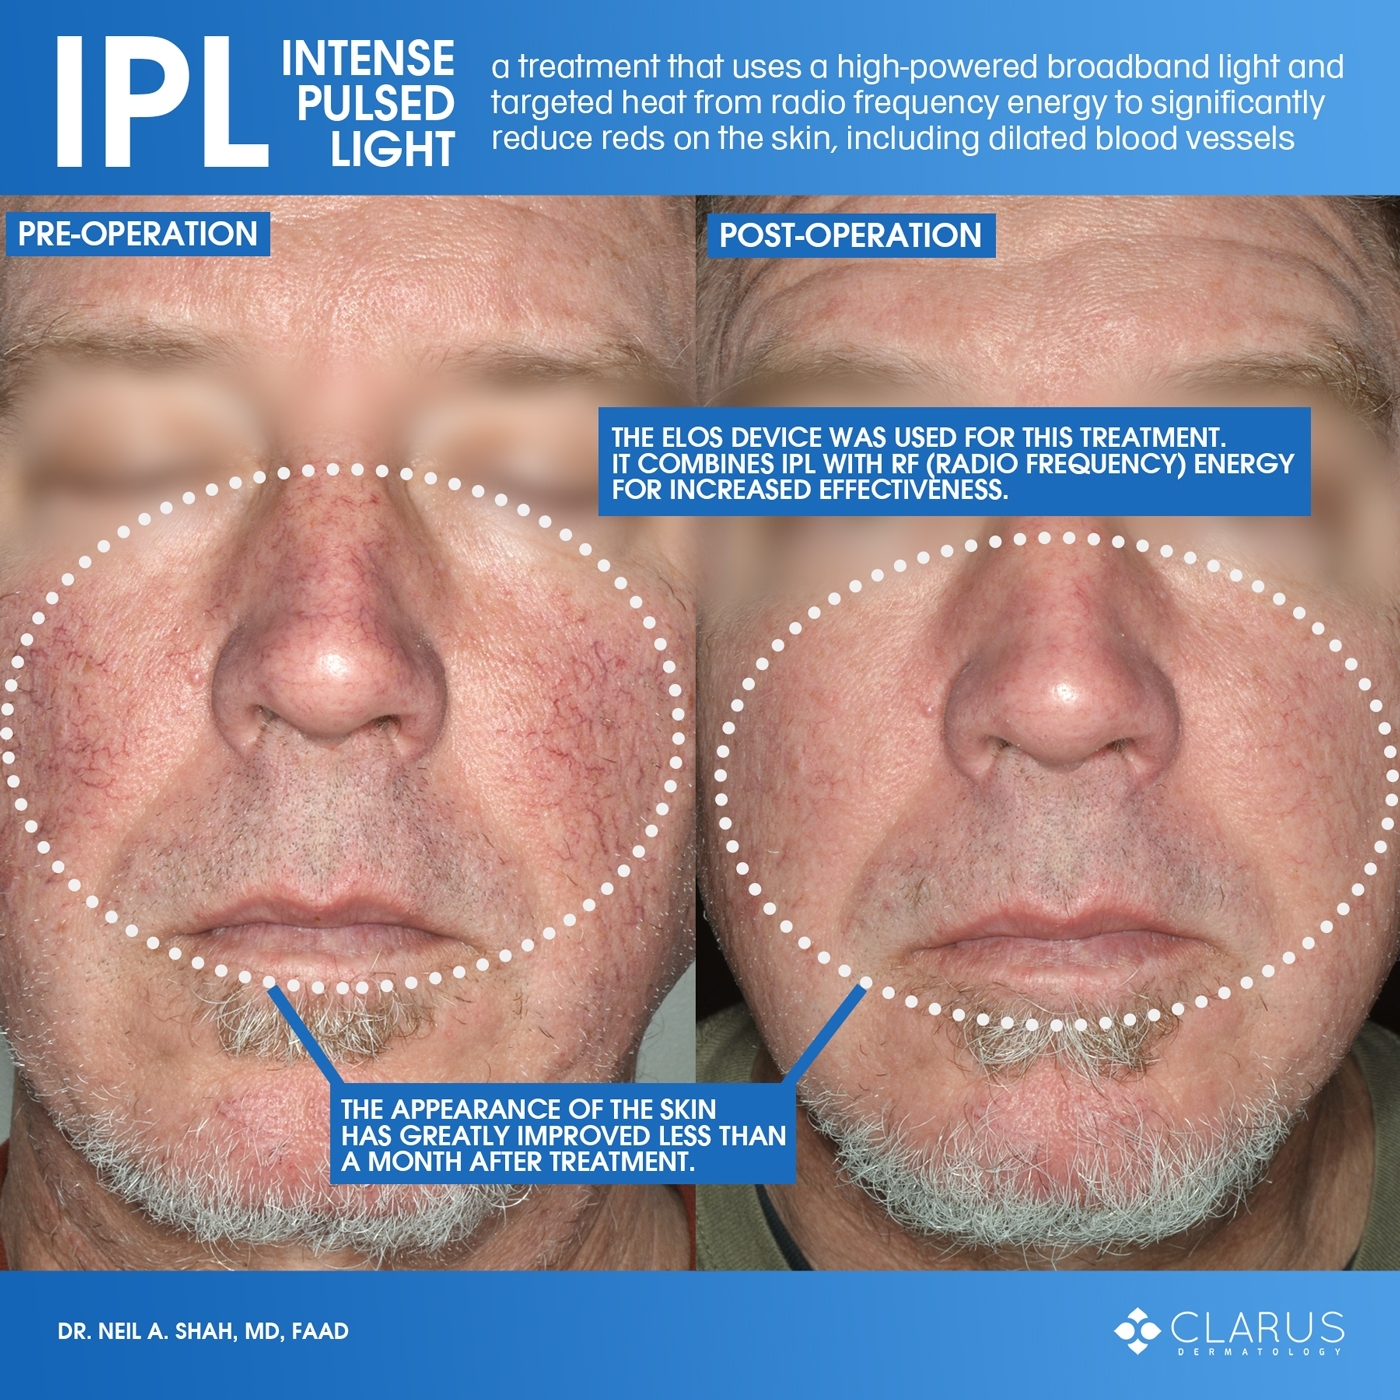 When it comes to the treatments that we perform at Clarus Dermatology, IPL (Intense Pulsed Light) consistently delivers results for our patients. When we look at the before and after images, the visible improvements after just a single treatment are quite apparent.